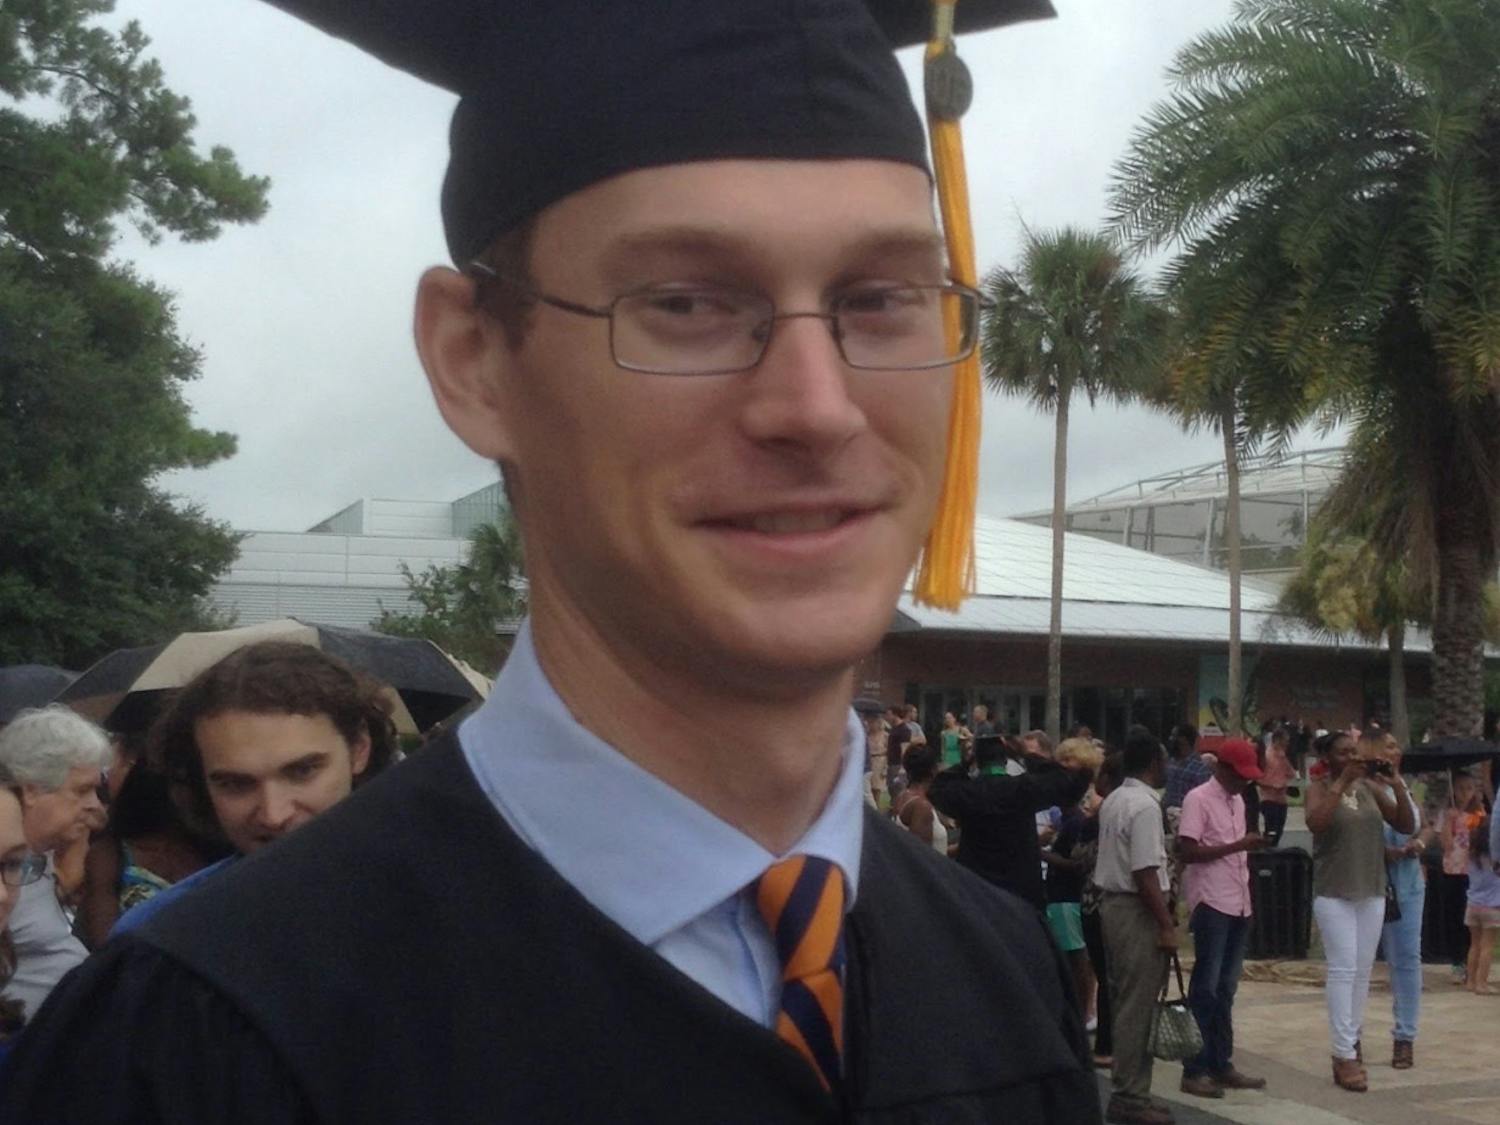 Thomas Anderson graduates from UF with three bachelor’s degrees in 2017.
